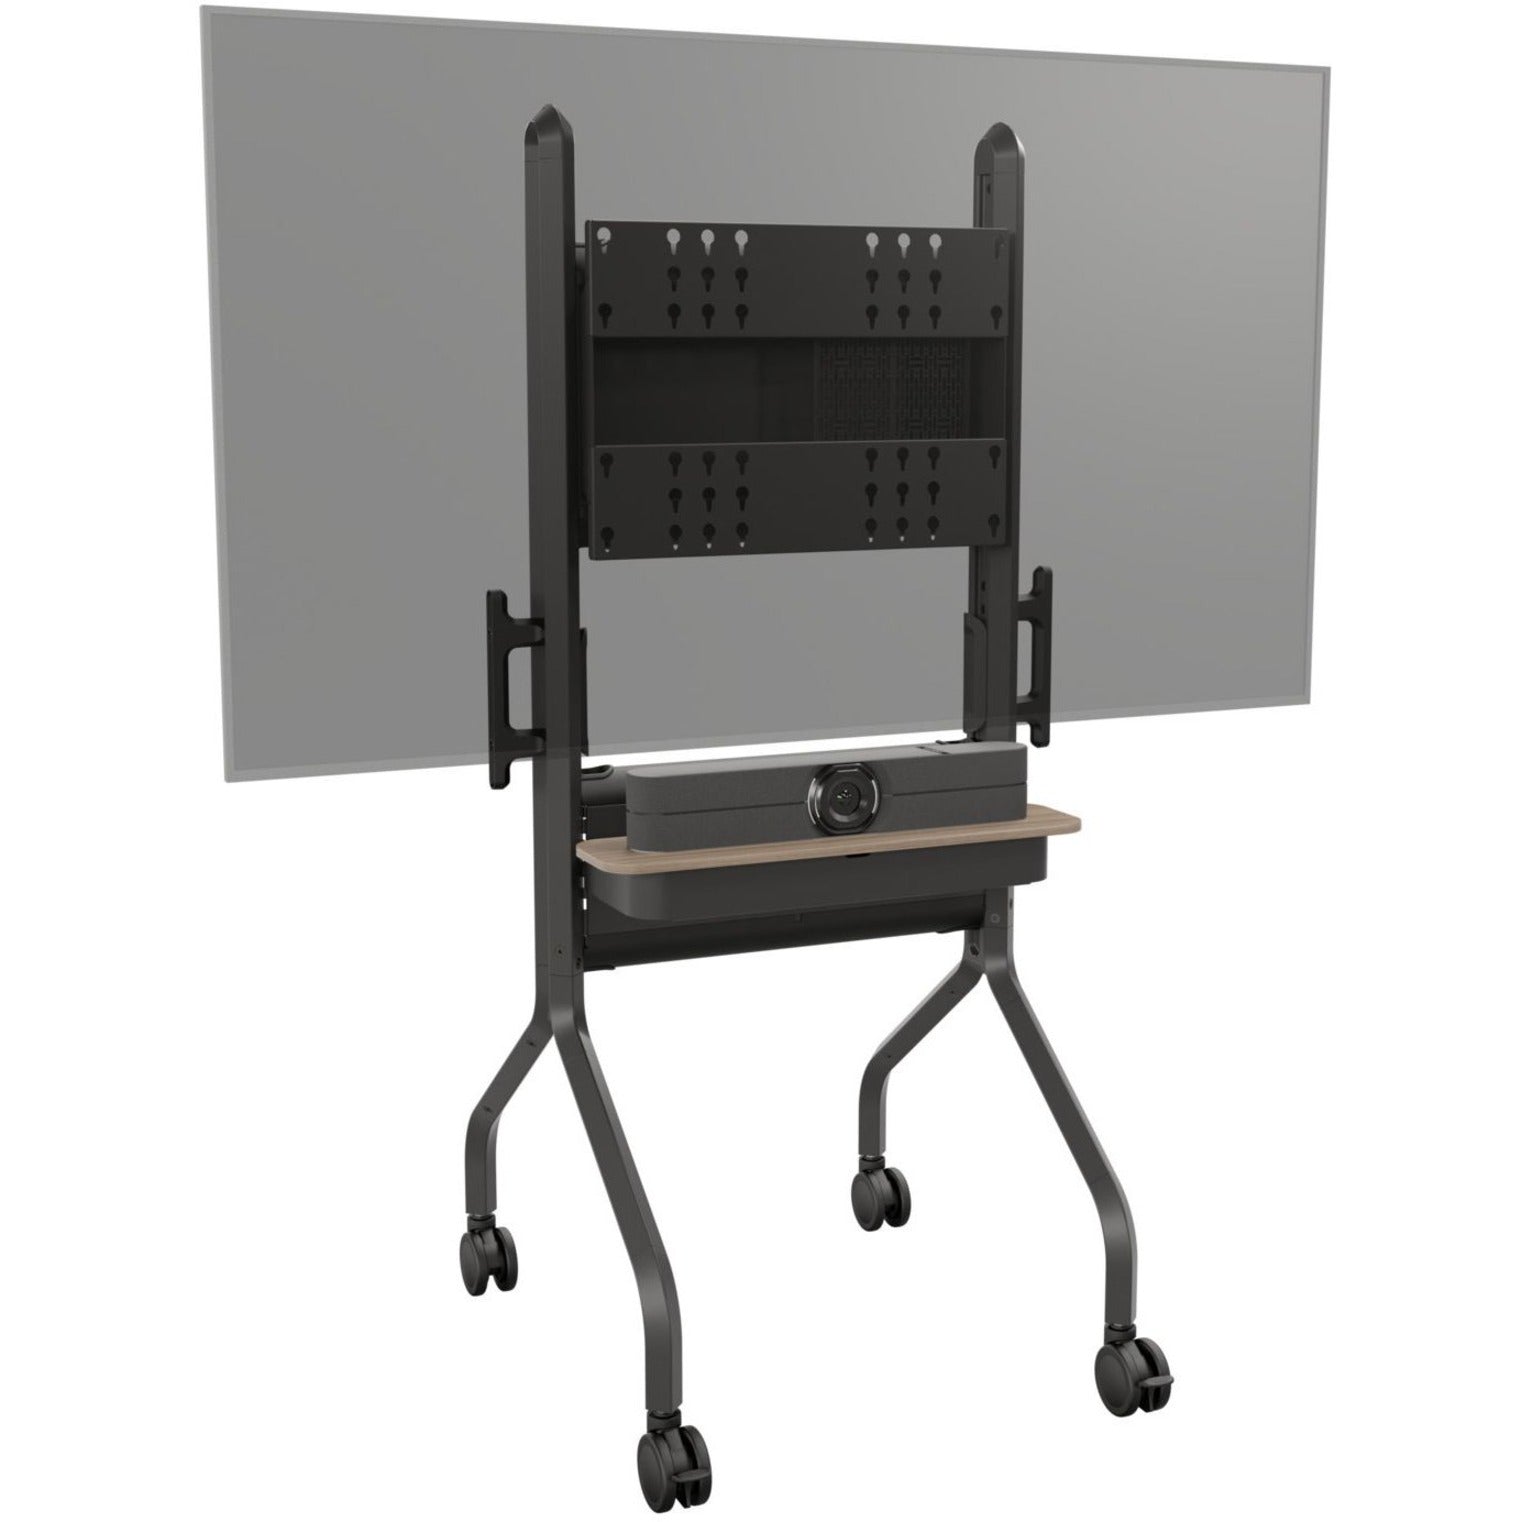 Chief LSCUB Voyager Height Adjustable AV Cart - For 50-75" LCD Displays, Black